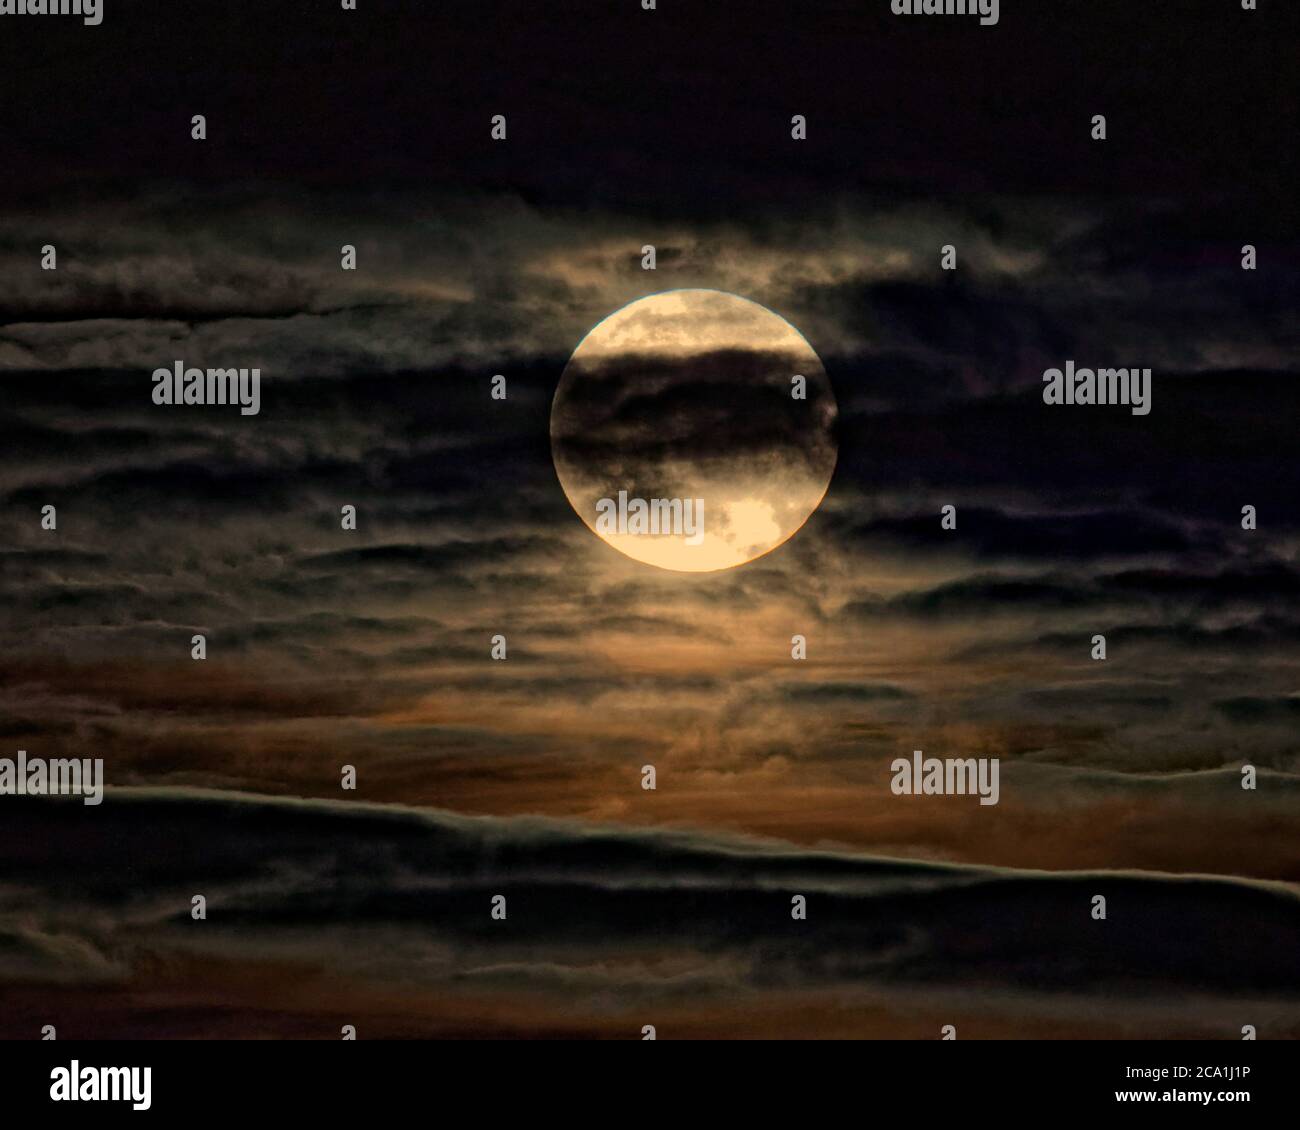 Glasgow, Scotland, UK 3rd  August, 2020: UK Weather: Sturgeon moon in lacerated sky as the weather turns to rain for the next few days as the moon peeks out like a face mask in these Coronavirus times. Credit: Gerard Ferry/Alamy Live News Stock Photo